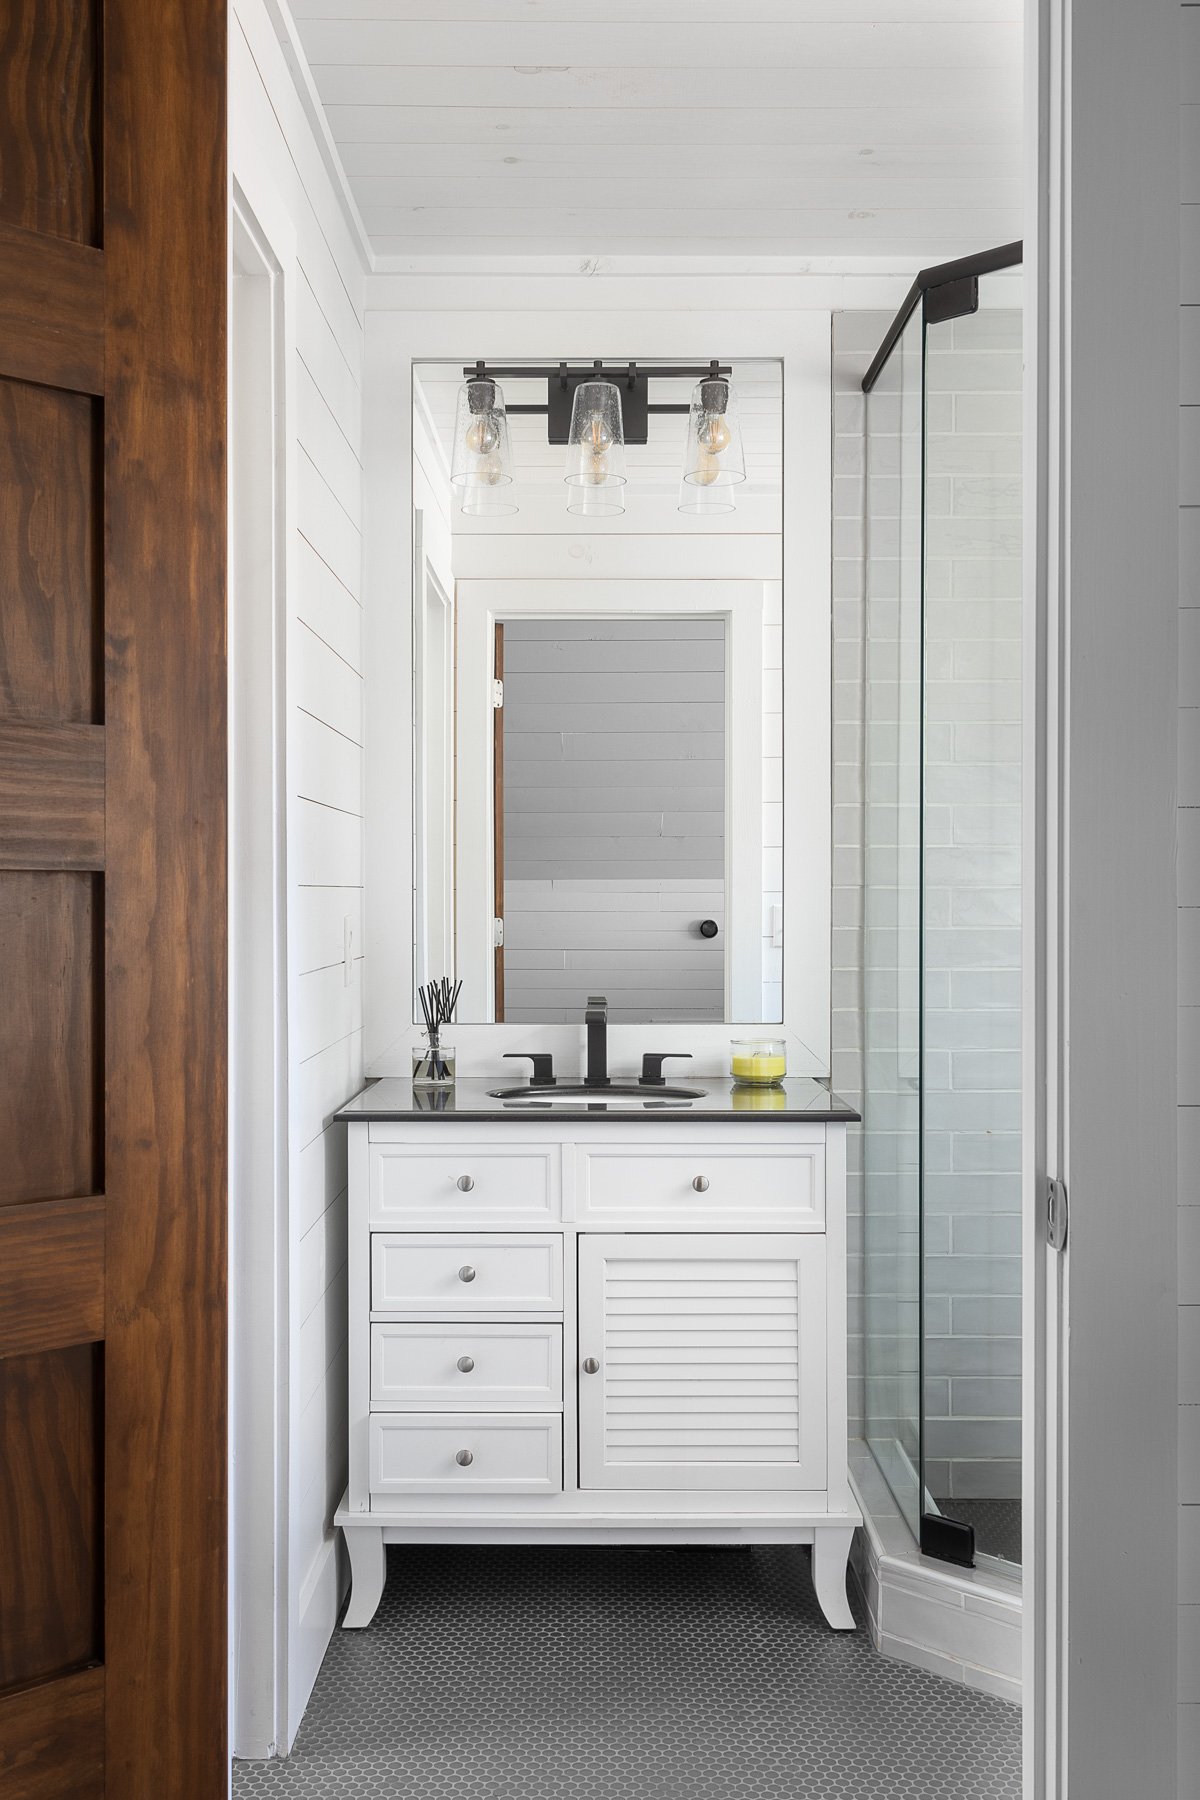 Modern bathroom with white vanity, subway tiles, and industrial-style lighting.